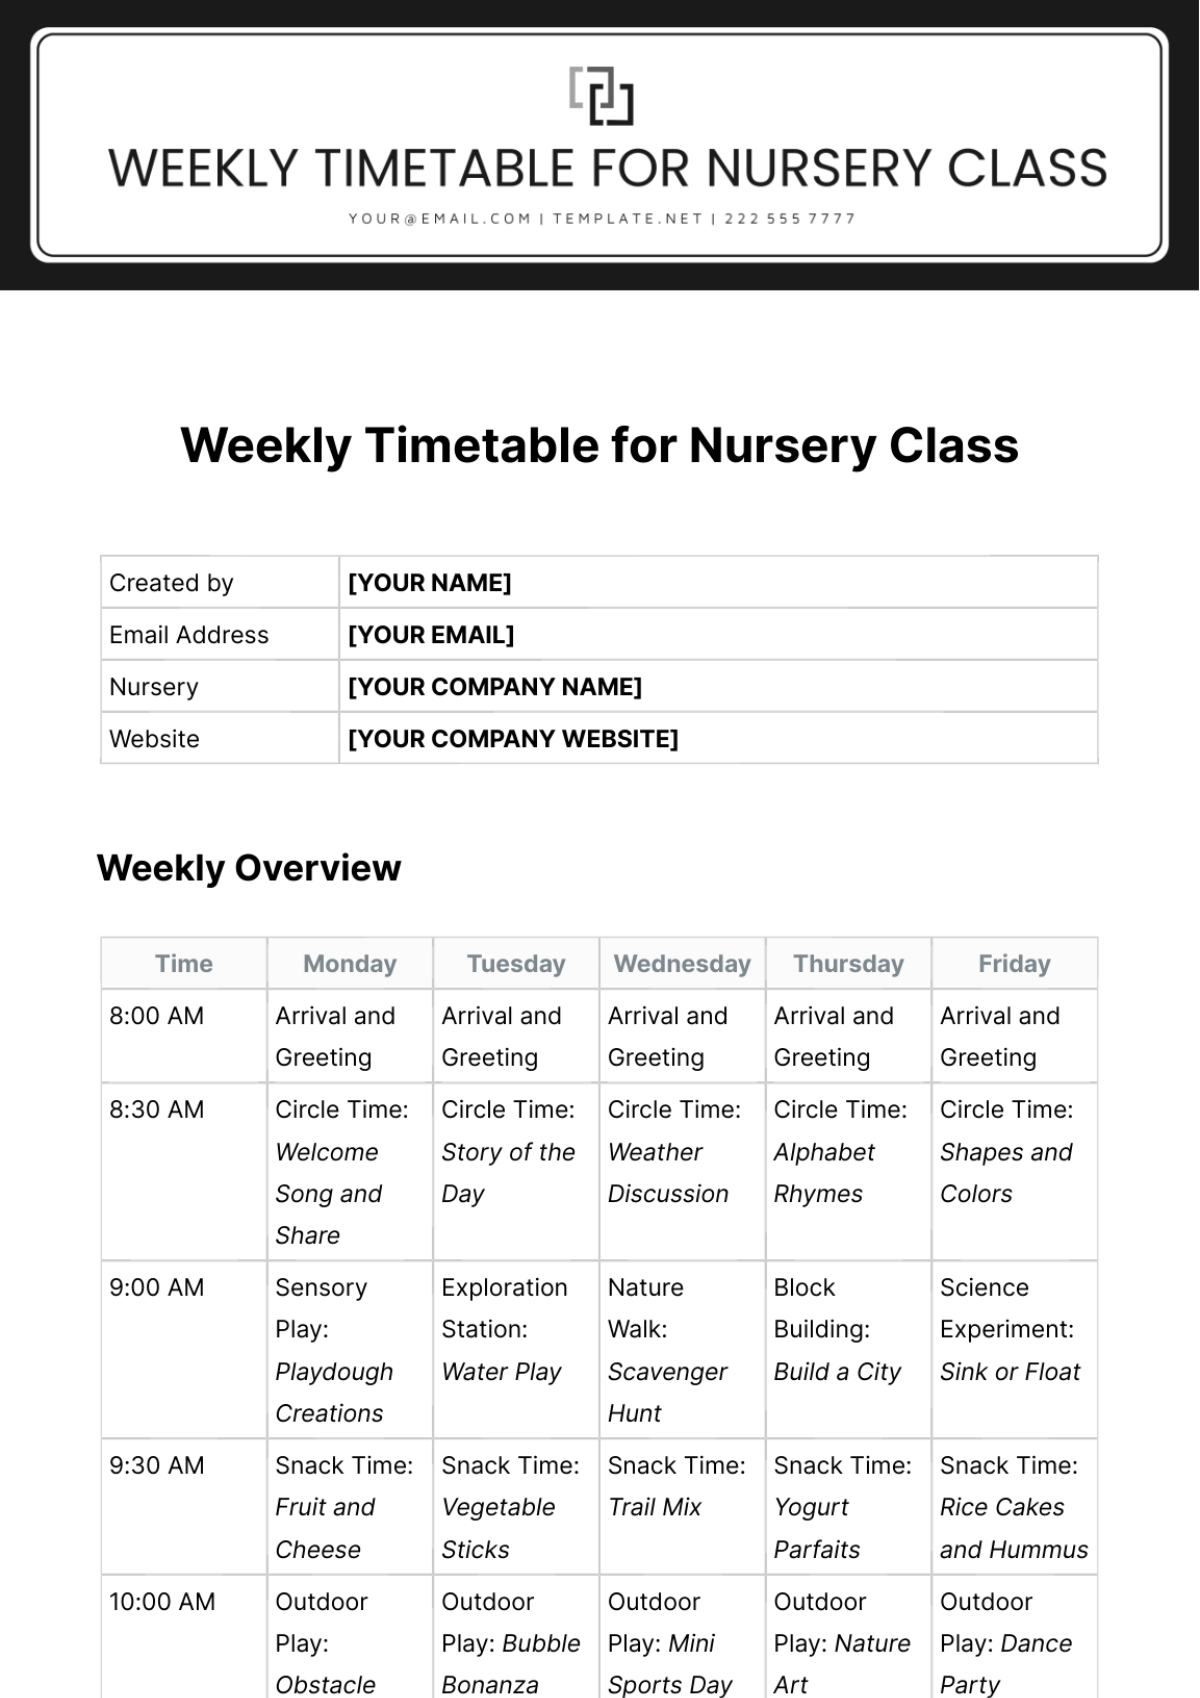 Weekly Timetable for Nursery Class Template